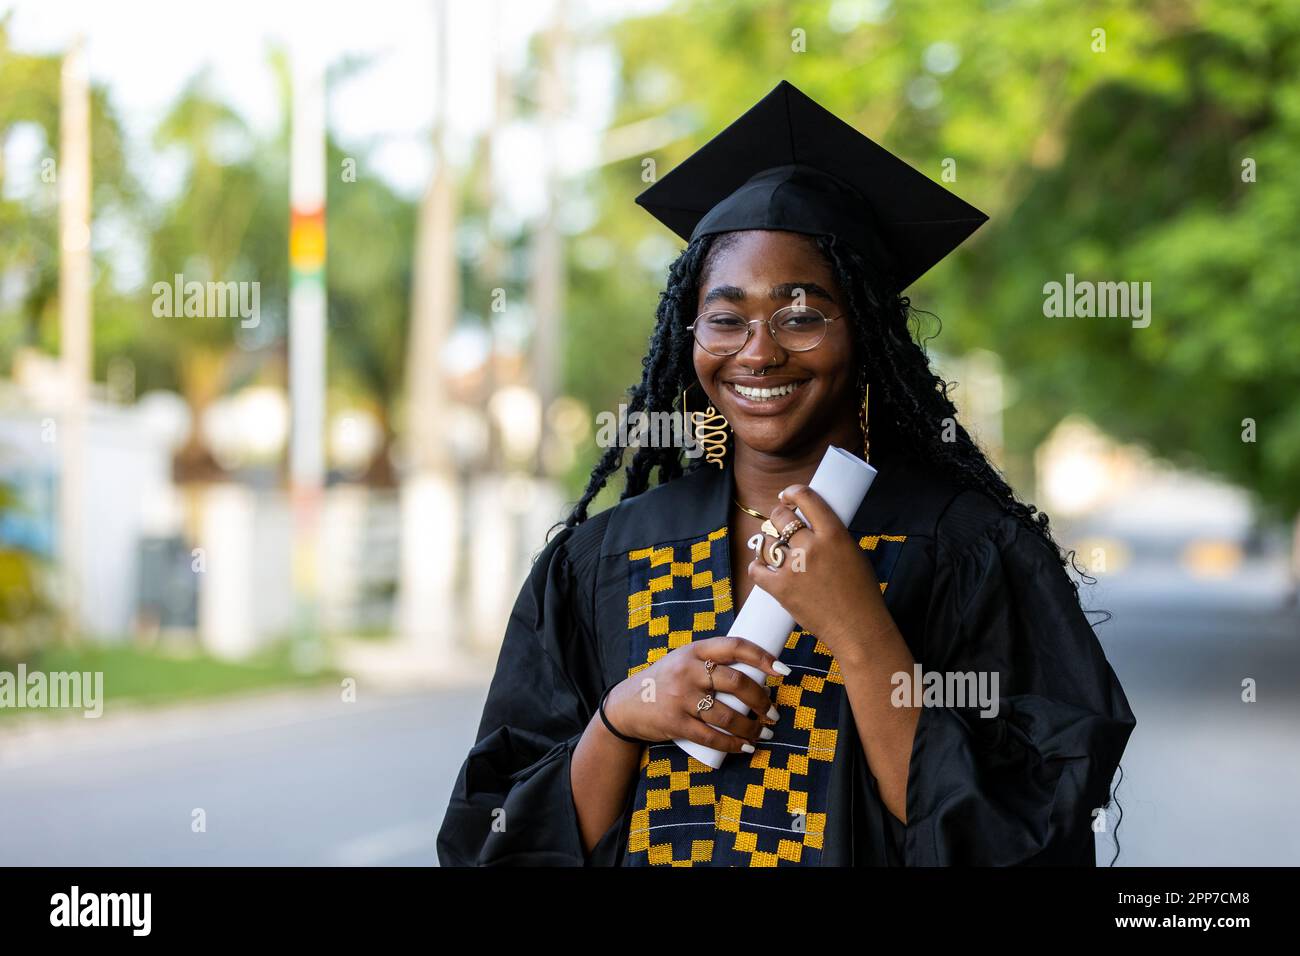 Portrait of Black Female University Graduate wearing black gown and cap, holding her diploma certificate, proud of academic achievement and success af Stock Photo